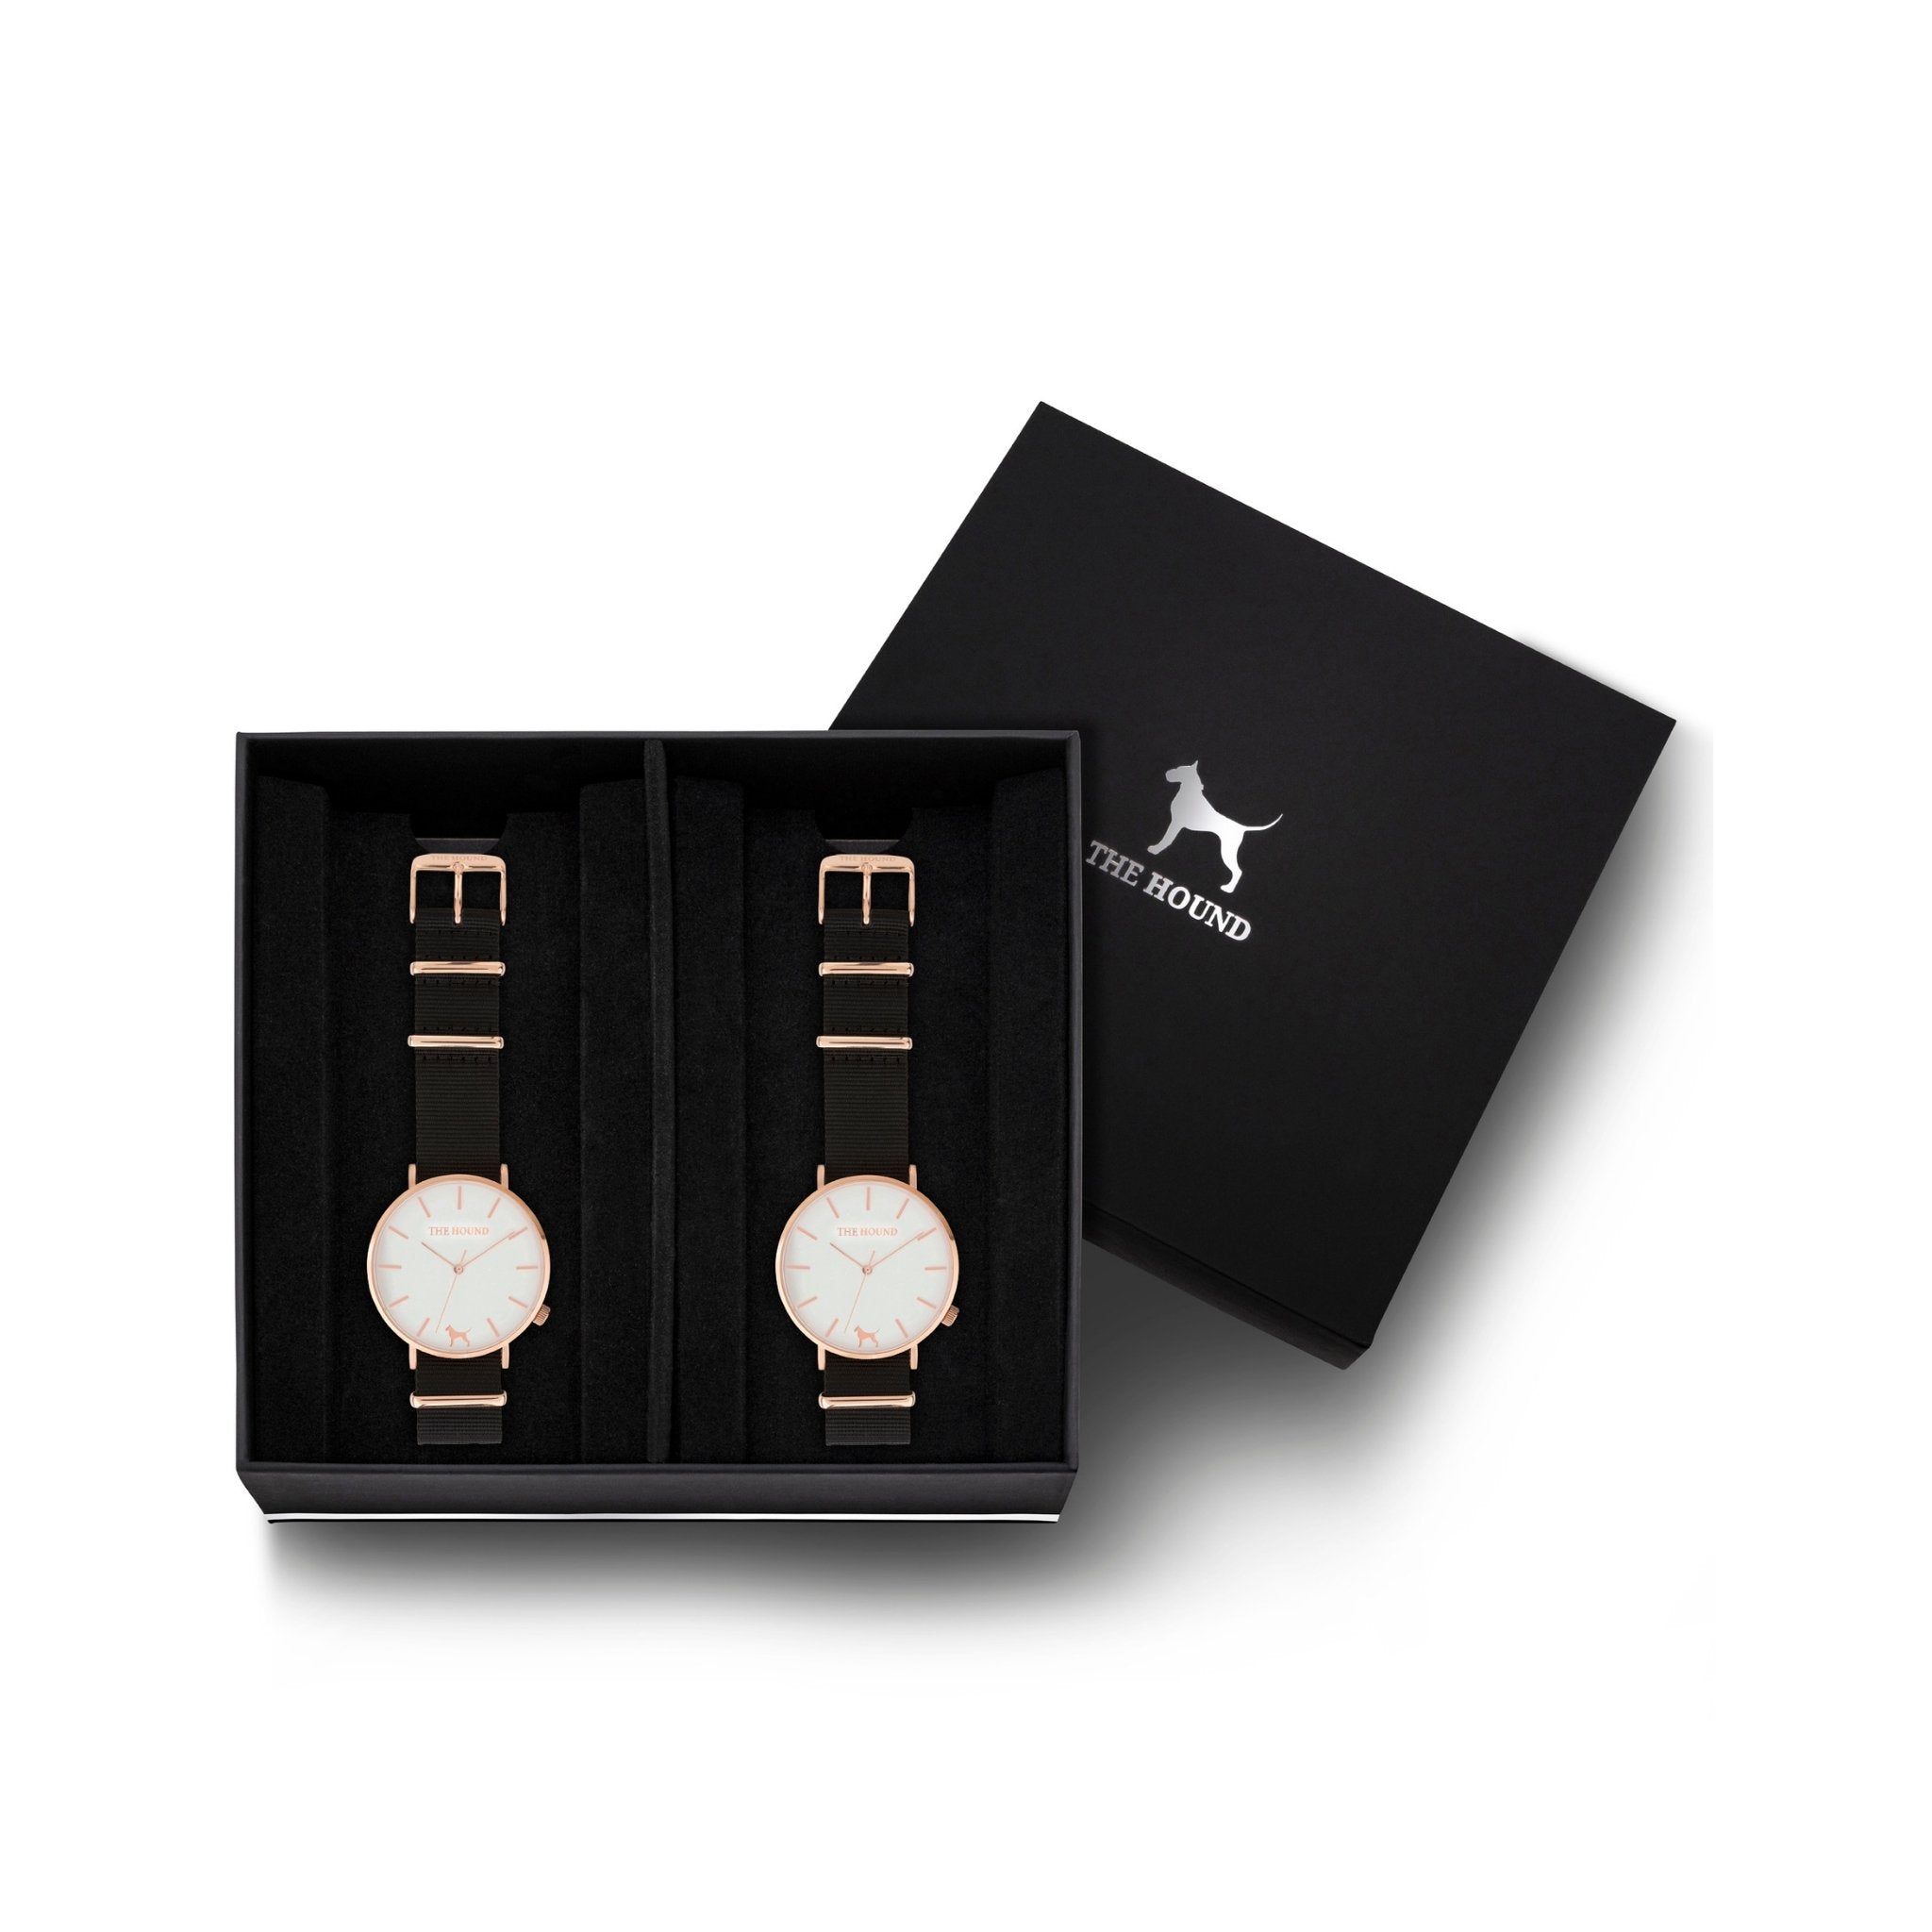 Custom gift set - Rose gold and white watch with black nato band and a rose gold and white watch with black nato leather band